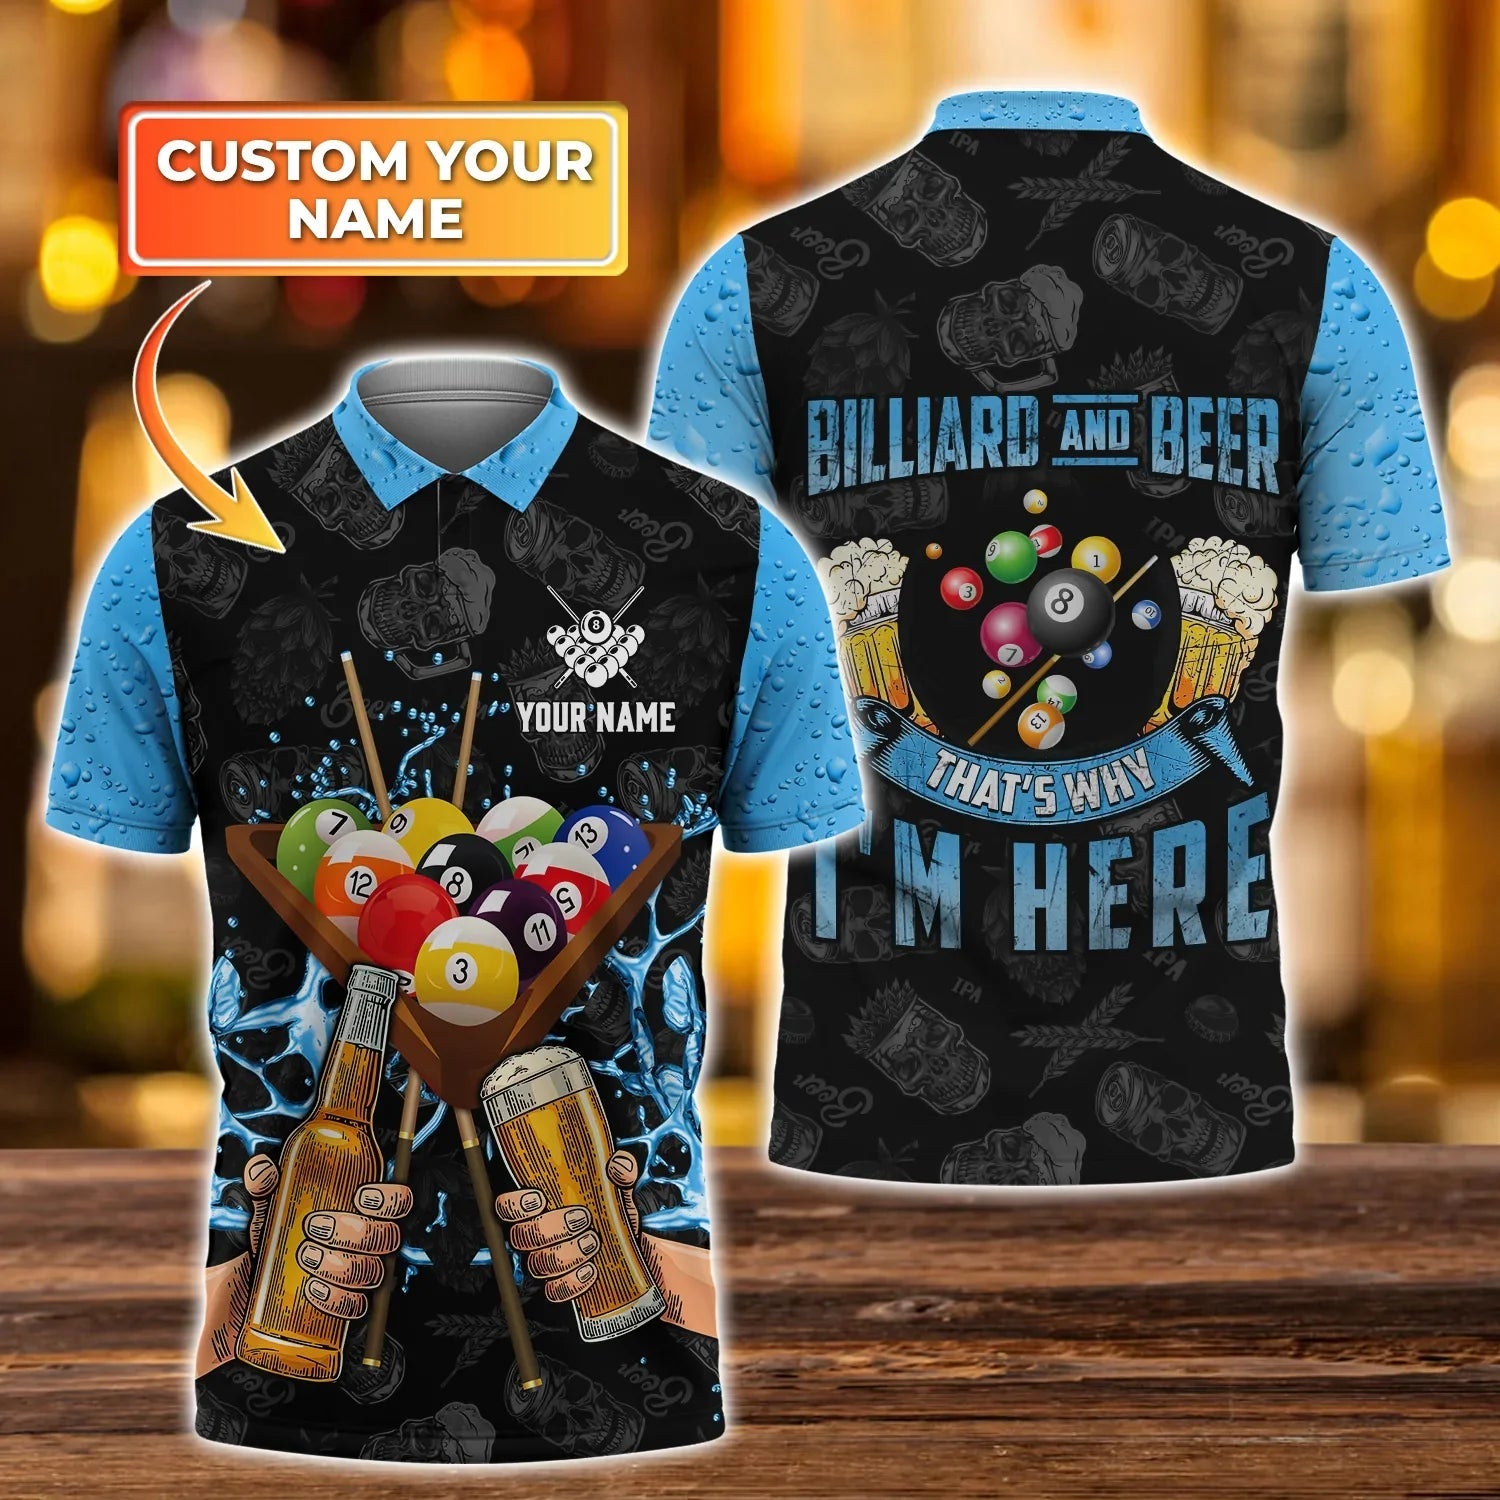 Personalized Name Blue Billiard and Beer Polo Shirt, 3D Over Print Billiard Shirts